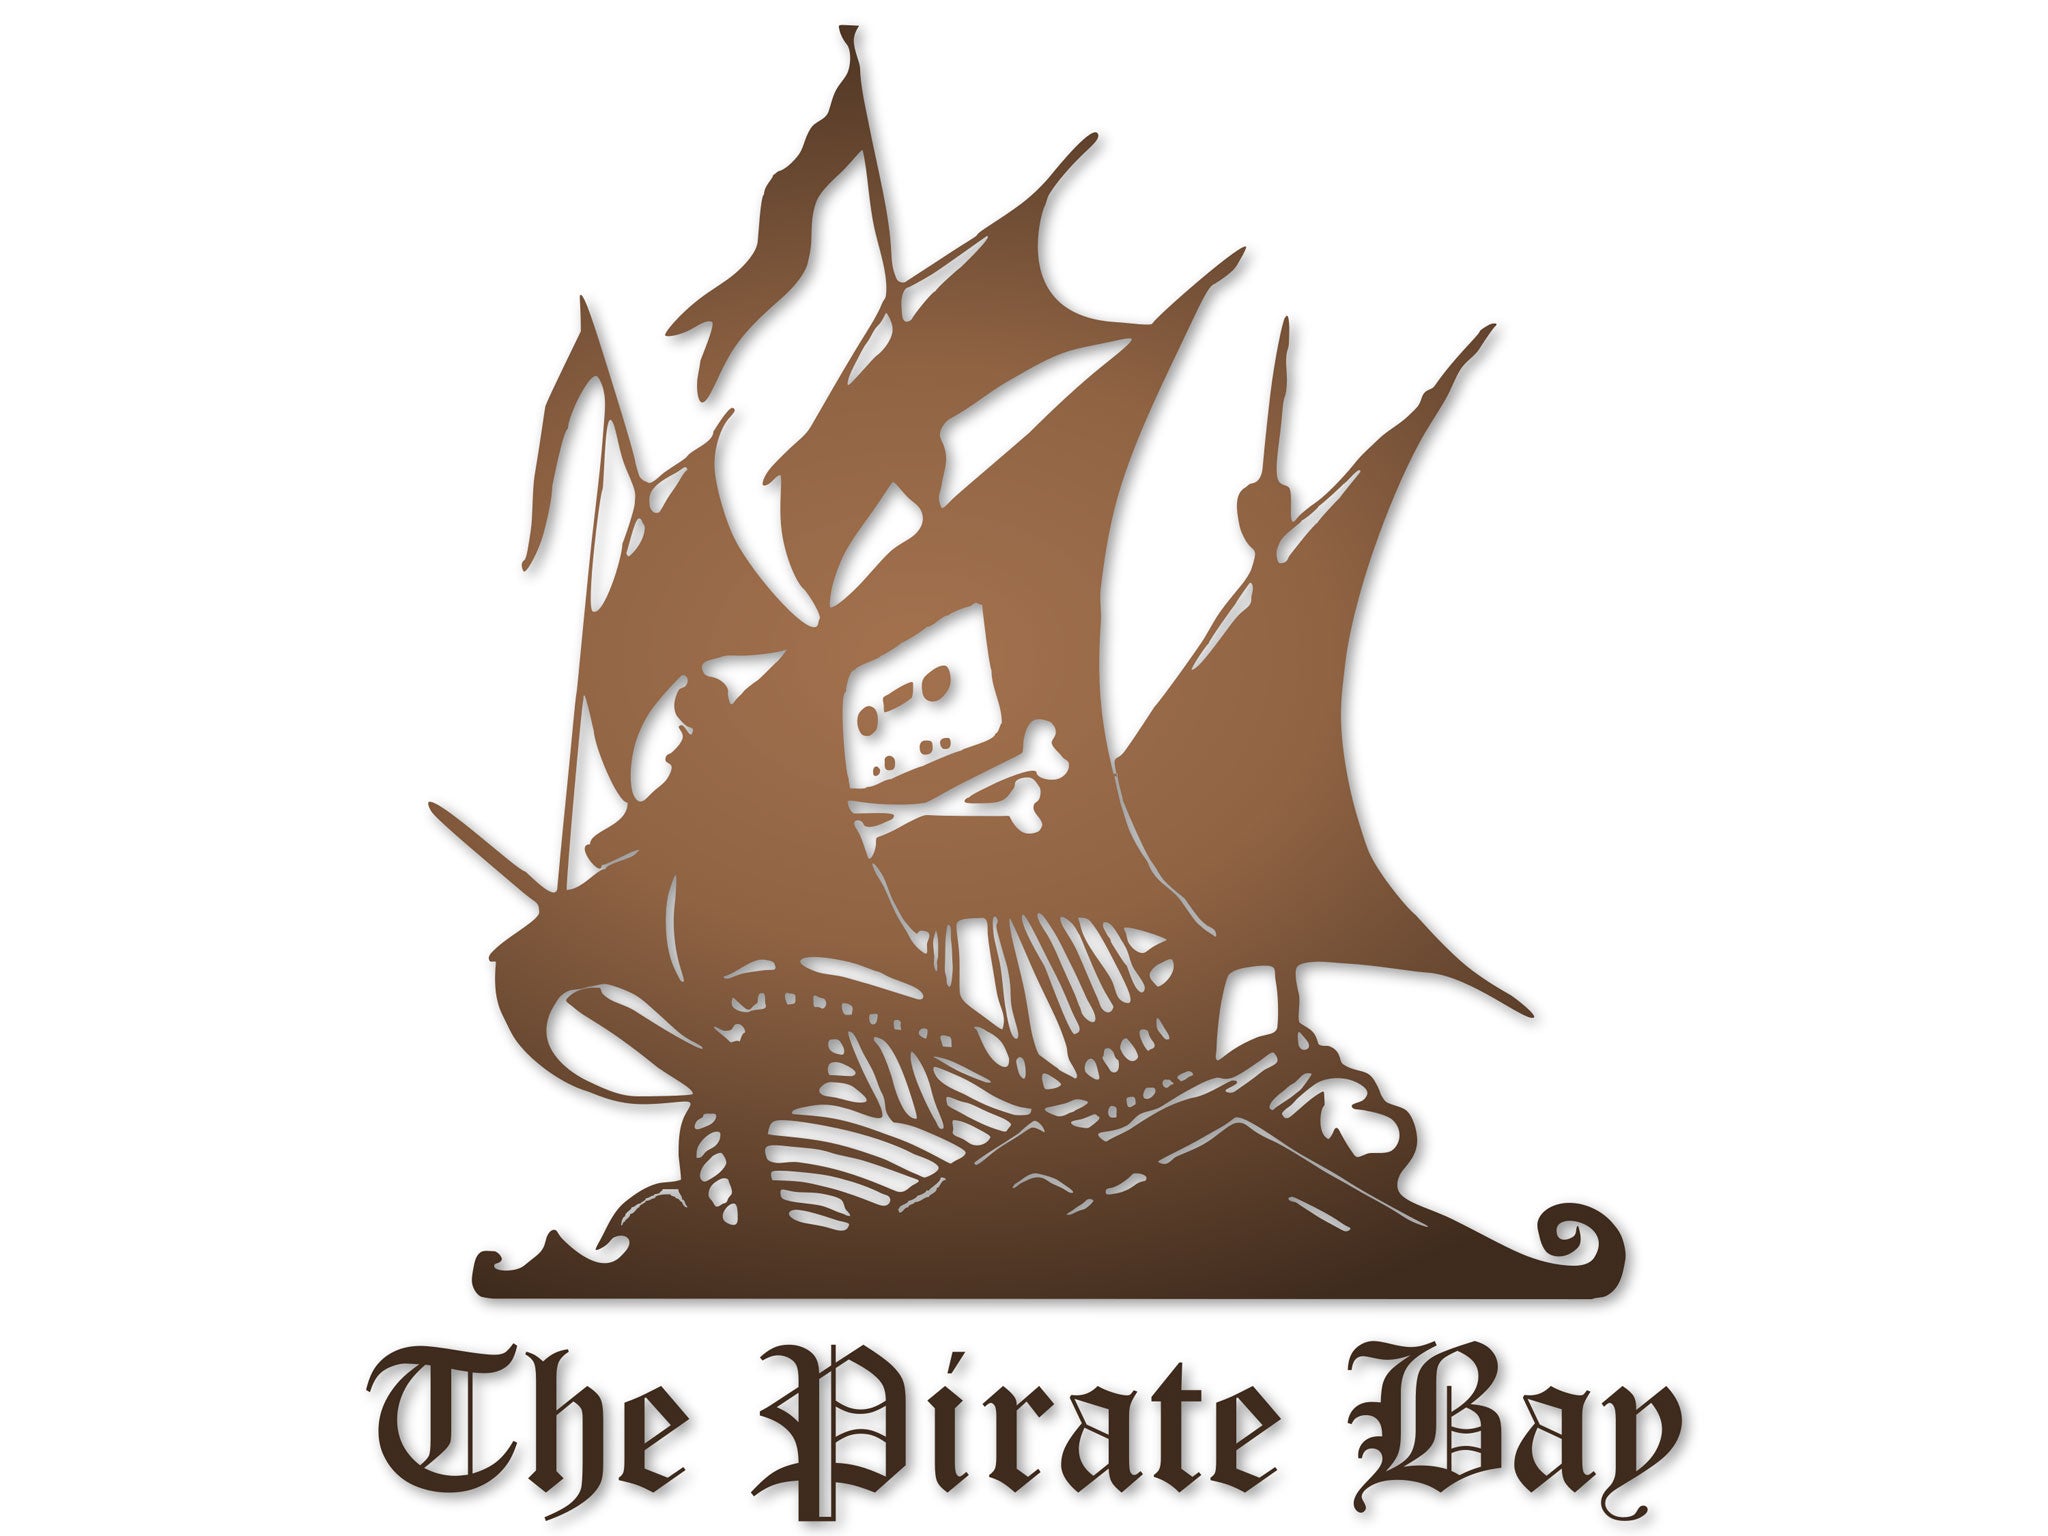 A ruling banning Dutch ISPs from letting subscribers access The Pirate Bay torrent website has been lifted.